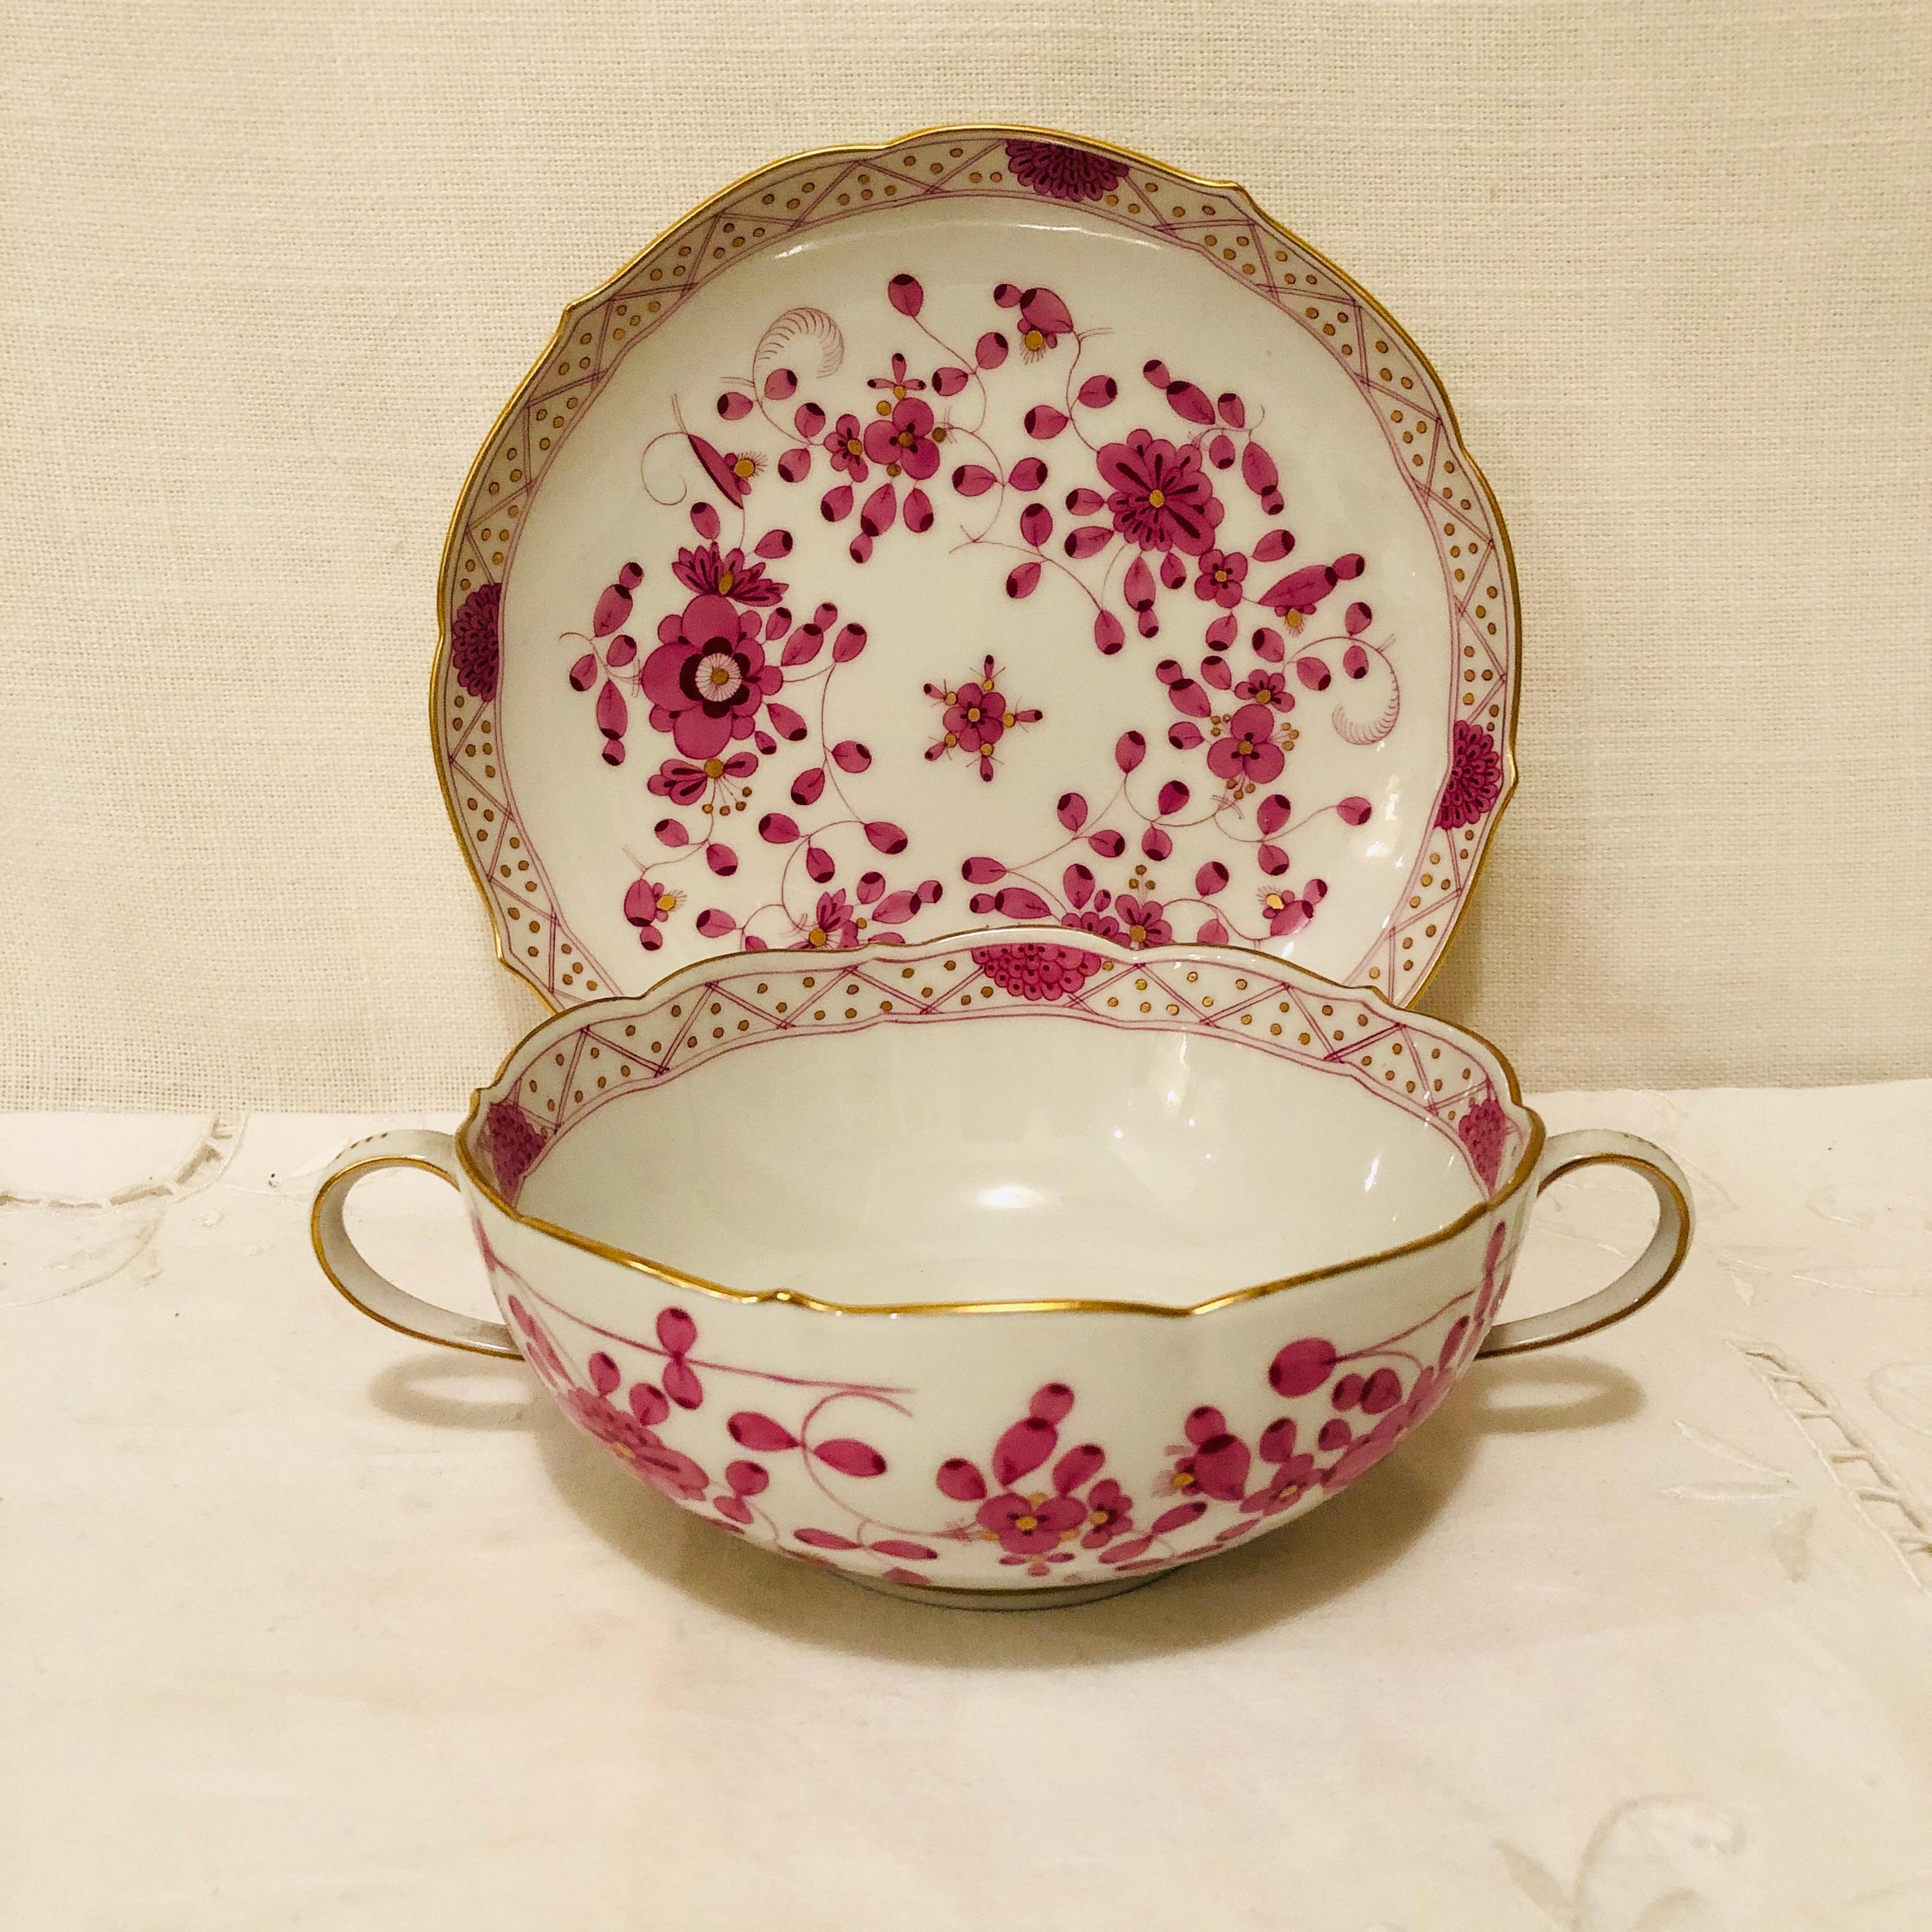 We would like to offer you this fabulous set of twelve Meissen purple Indian cream soups and saucers. These cream soups are very hard to find. In fact, in thirty years, I have never seen these before. They are very good size, and you could serve any